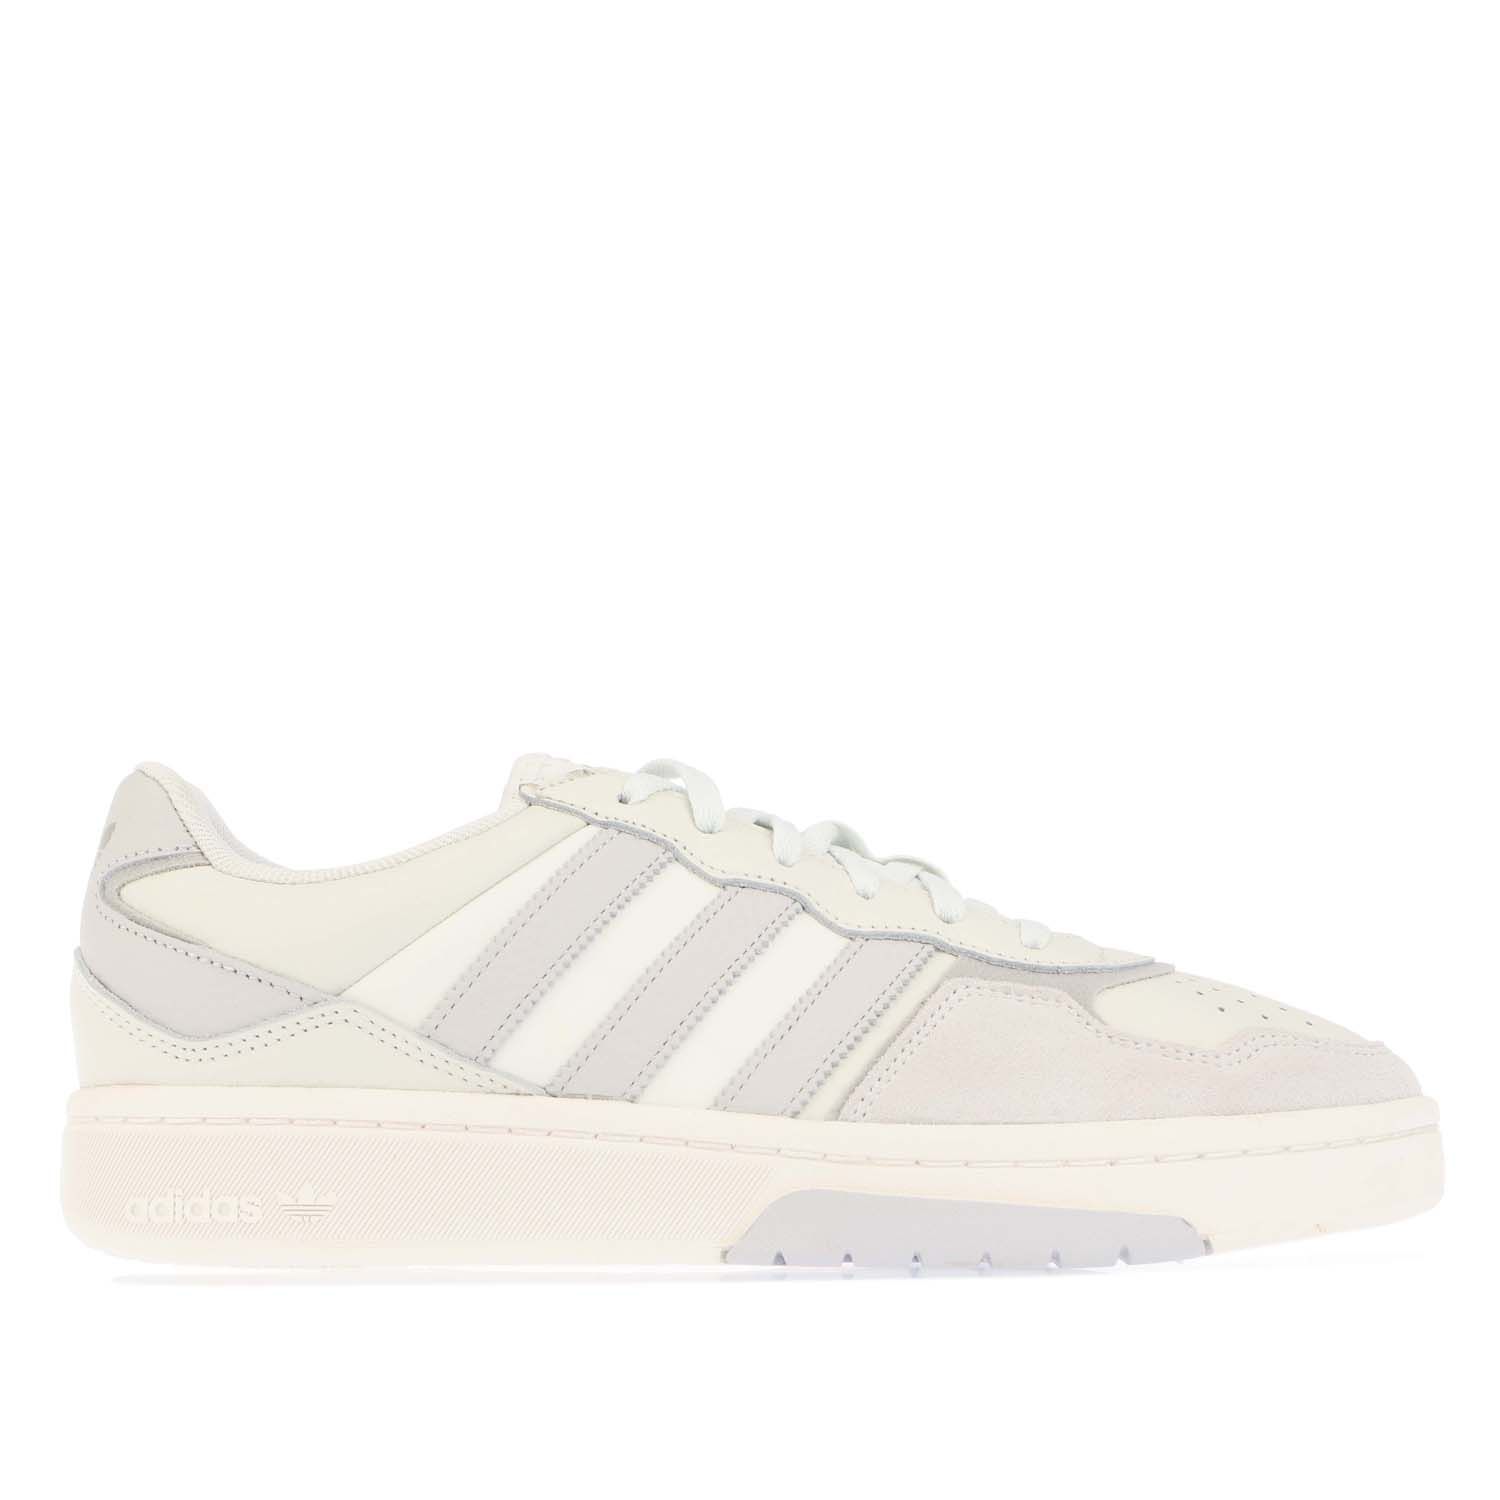 Mens adidas Originals Courtic Trainers in off white.- Leather upper.- Lace closure.- Regular fit.- Serrated 3-Stripes.- Textile lining.- Rubber outsole.- Ref: GY3591